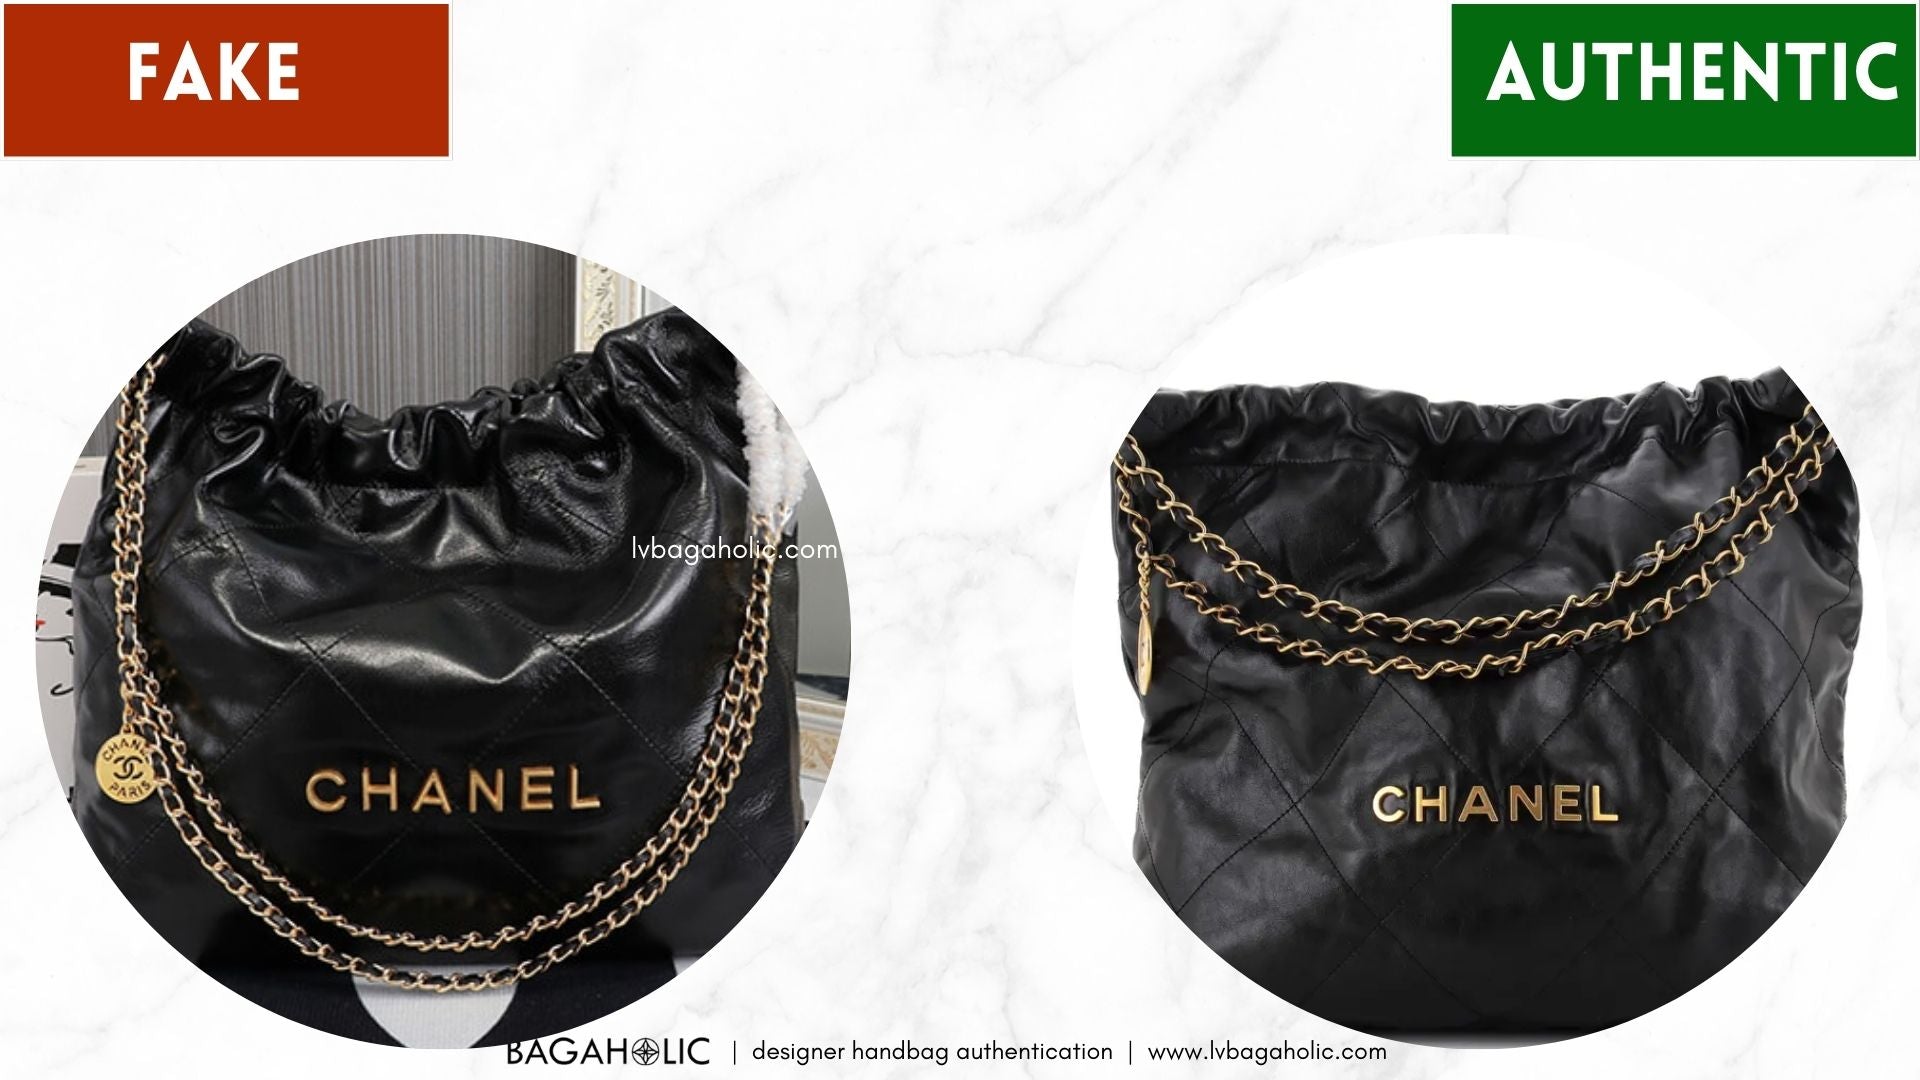 How to Tell If a Chanel 22 bag is real or fake